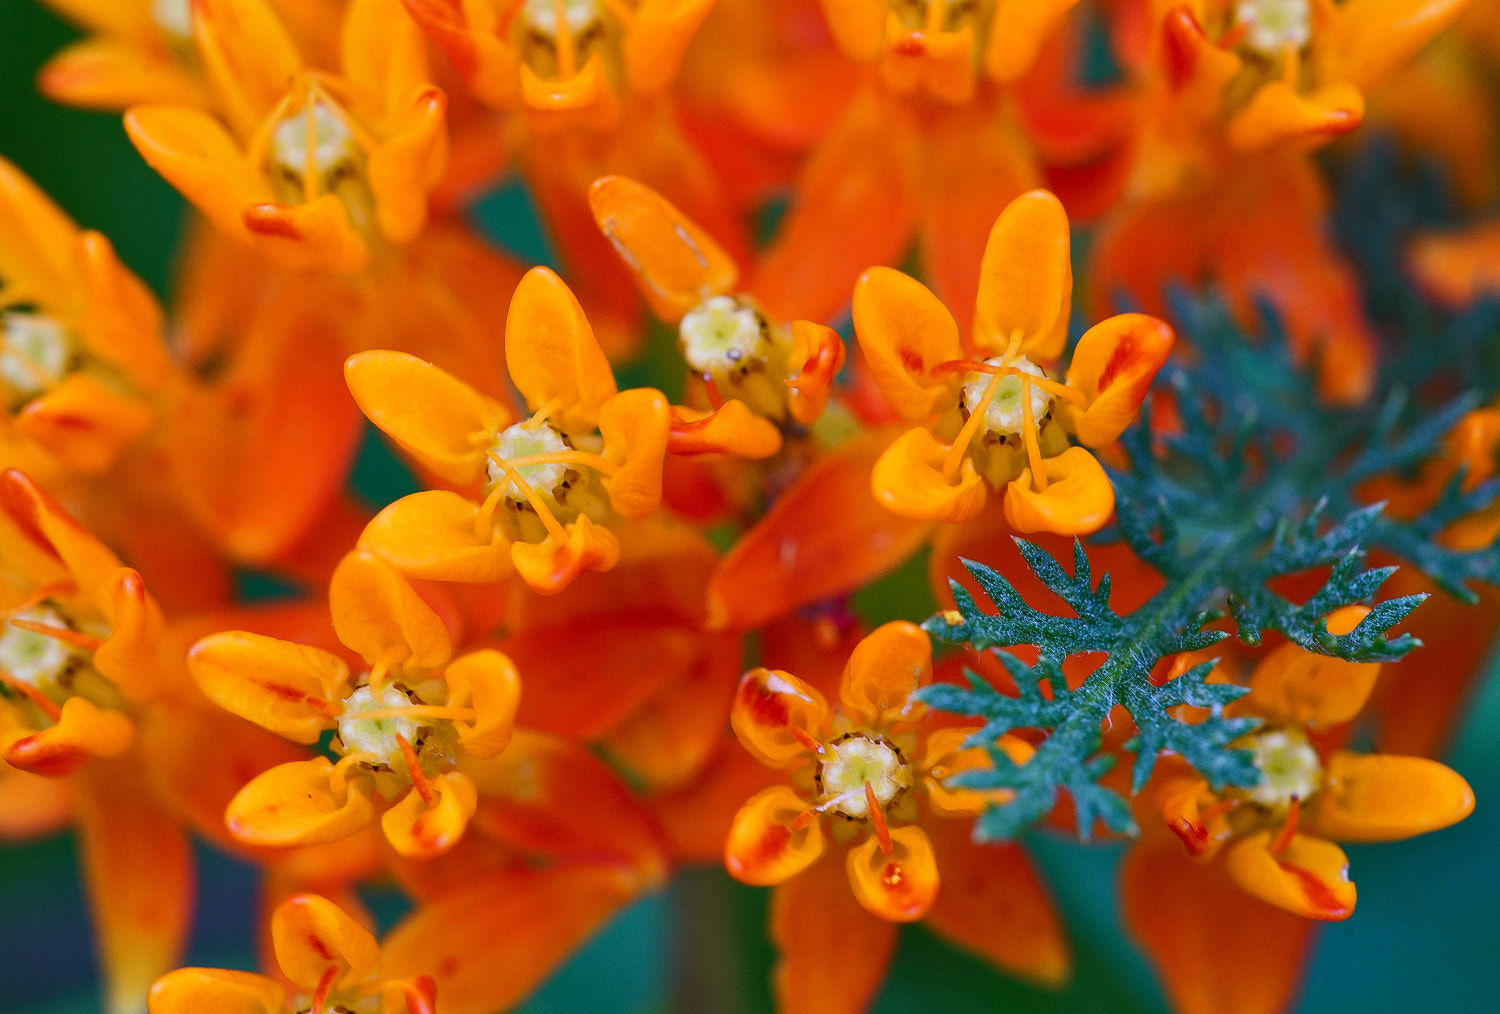 100mm F2.8 SSM sample photo. Butterfly weed photography